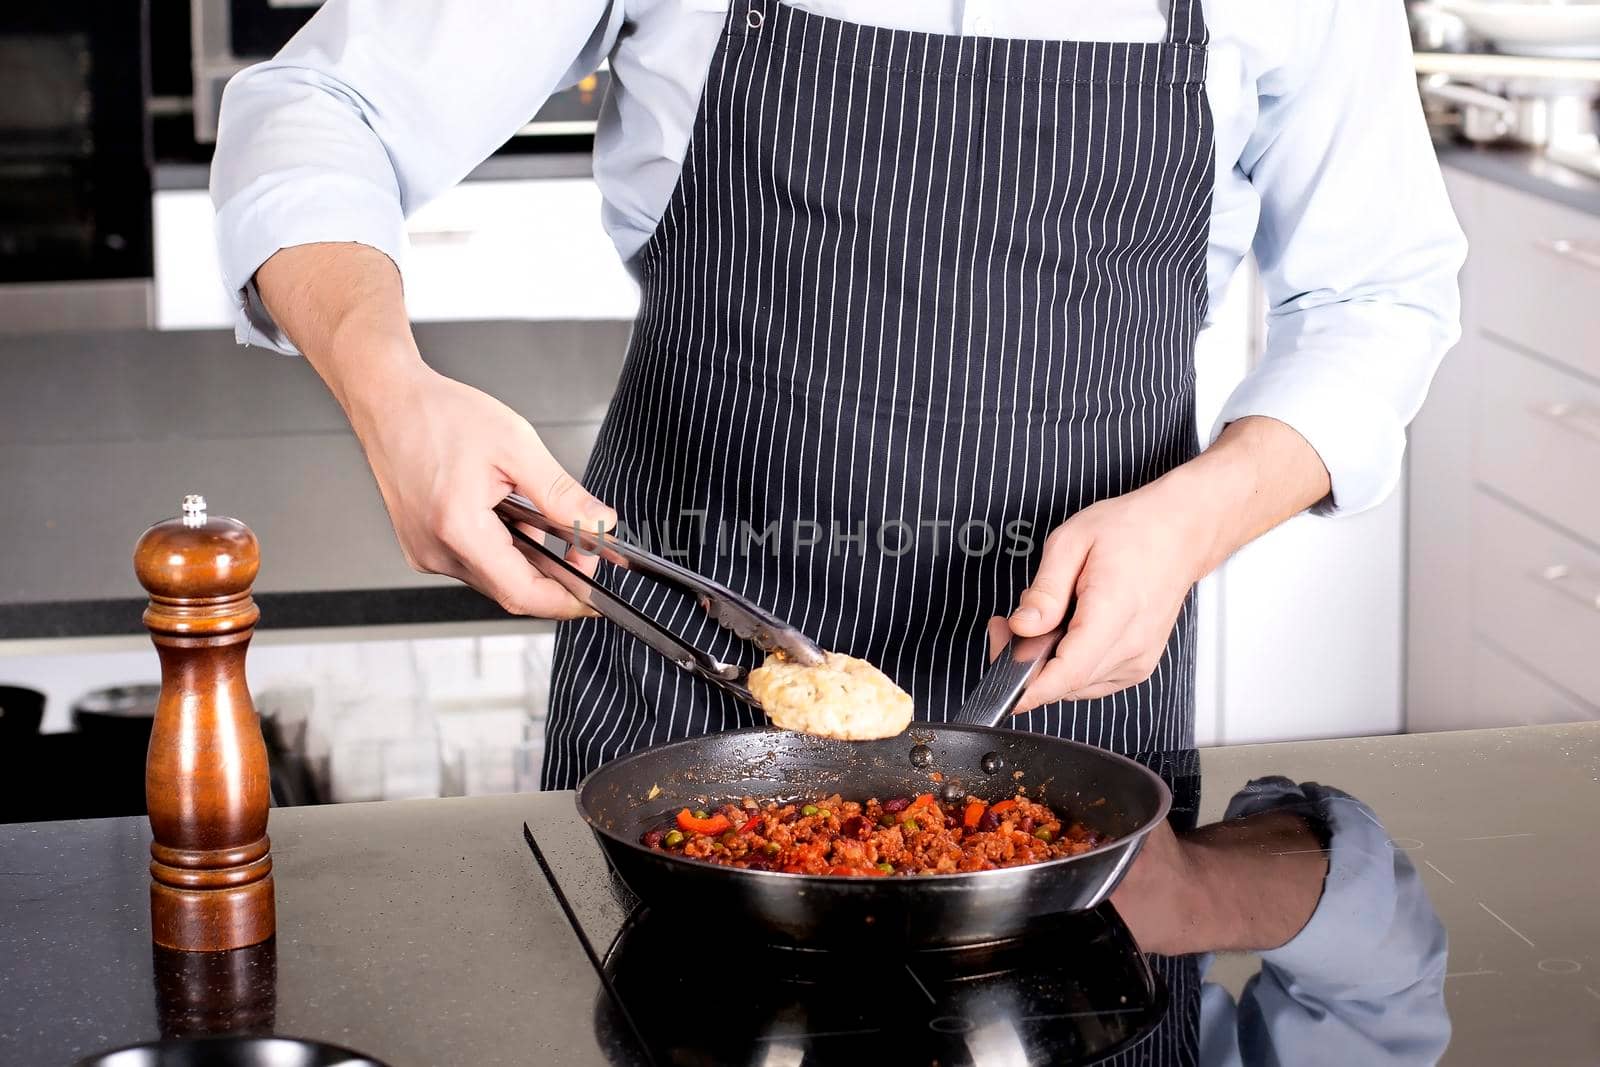 Chef preparing dishes in a frying pan by Jyliana